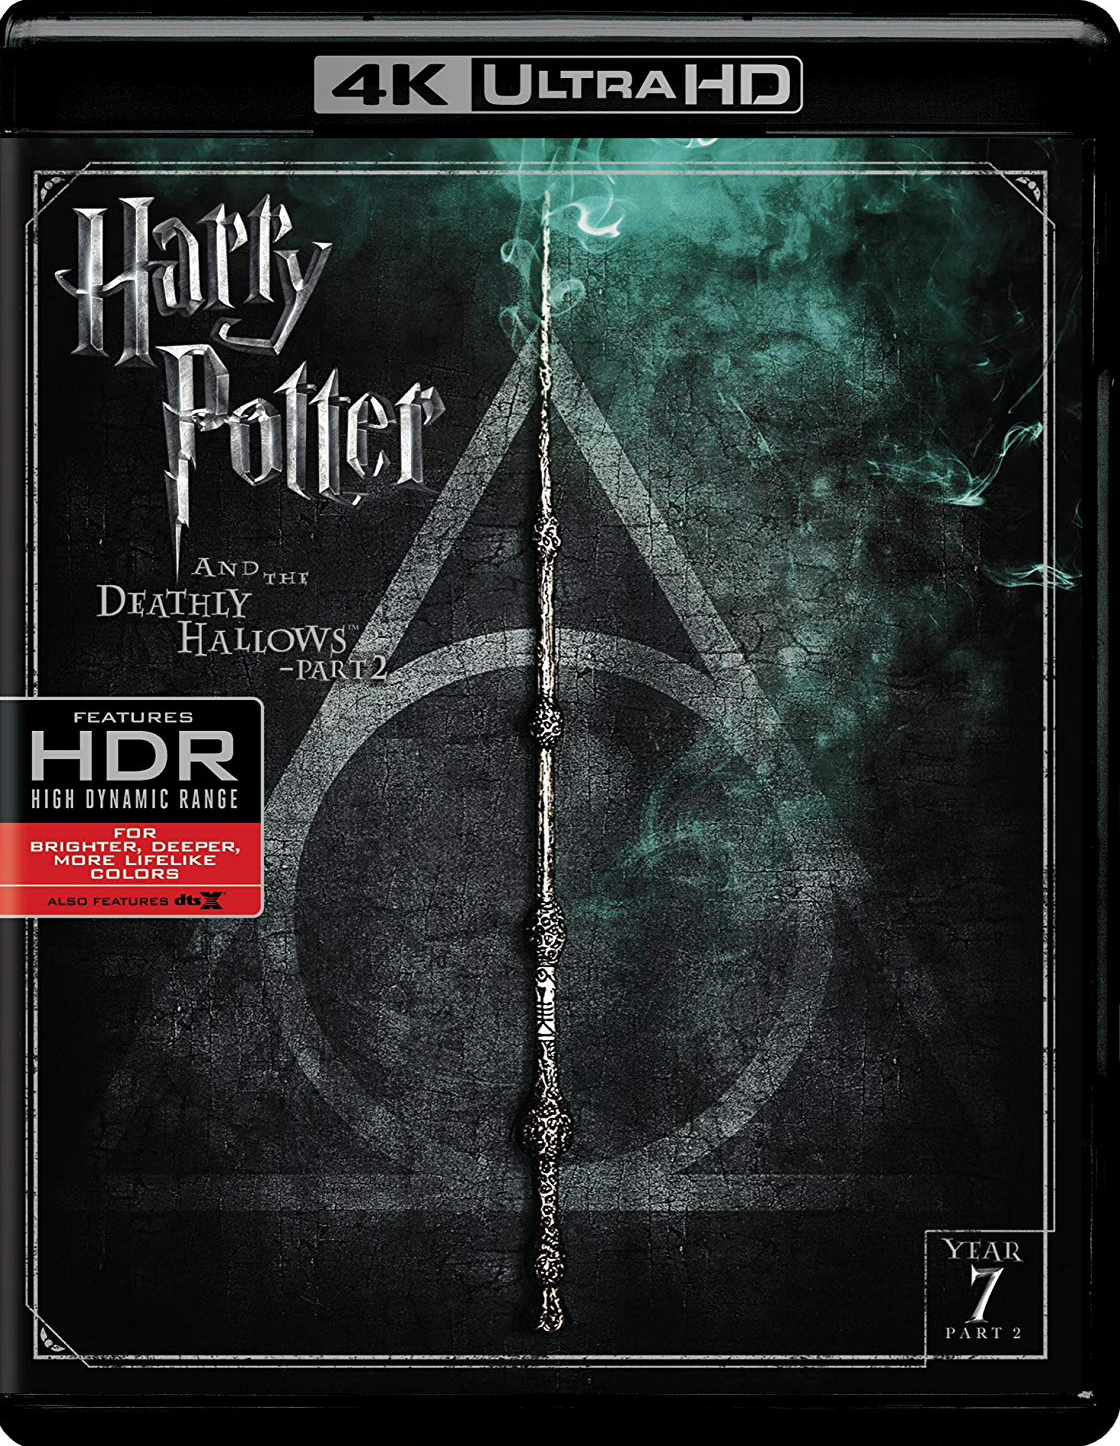 Harry Potter and the Deathly Hallows, Part 2 [4K Ultra HD Blu-ray